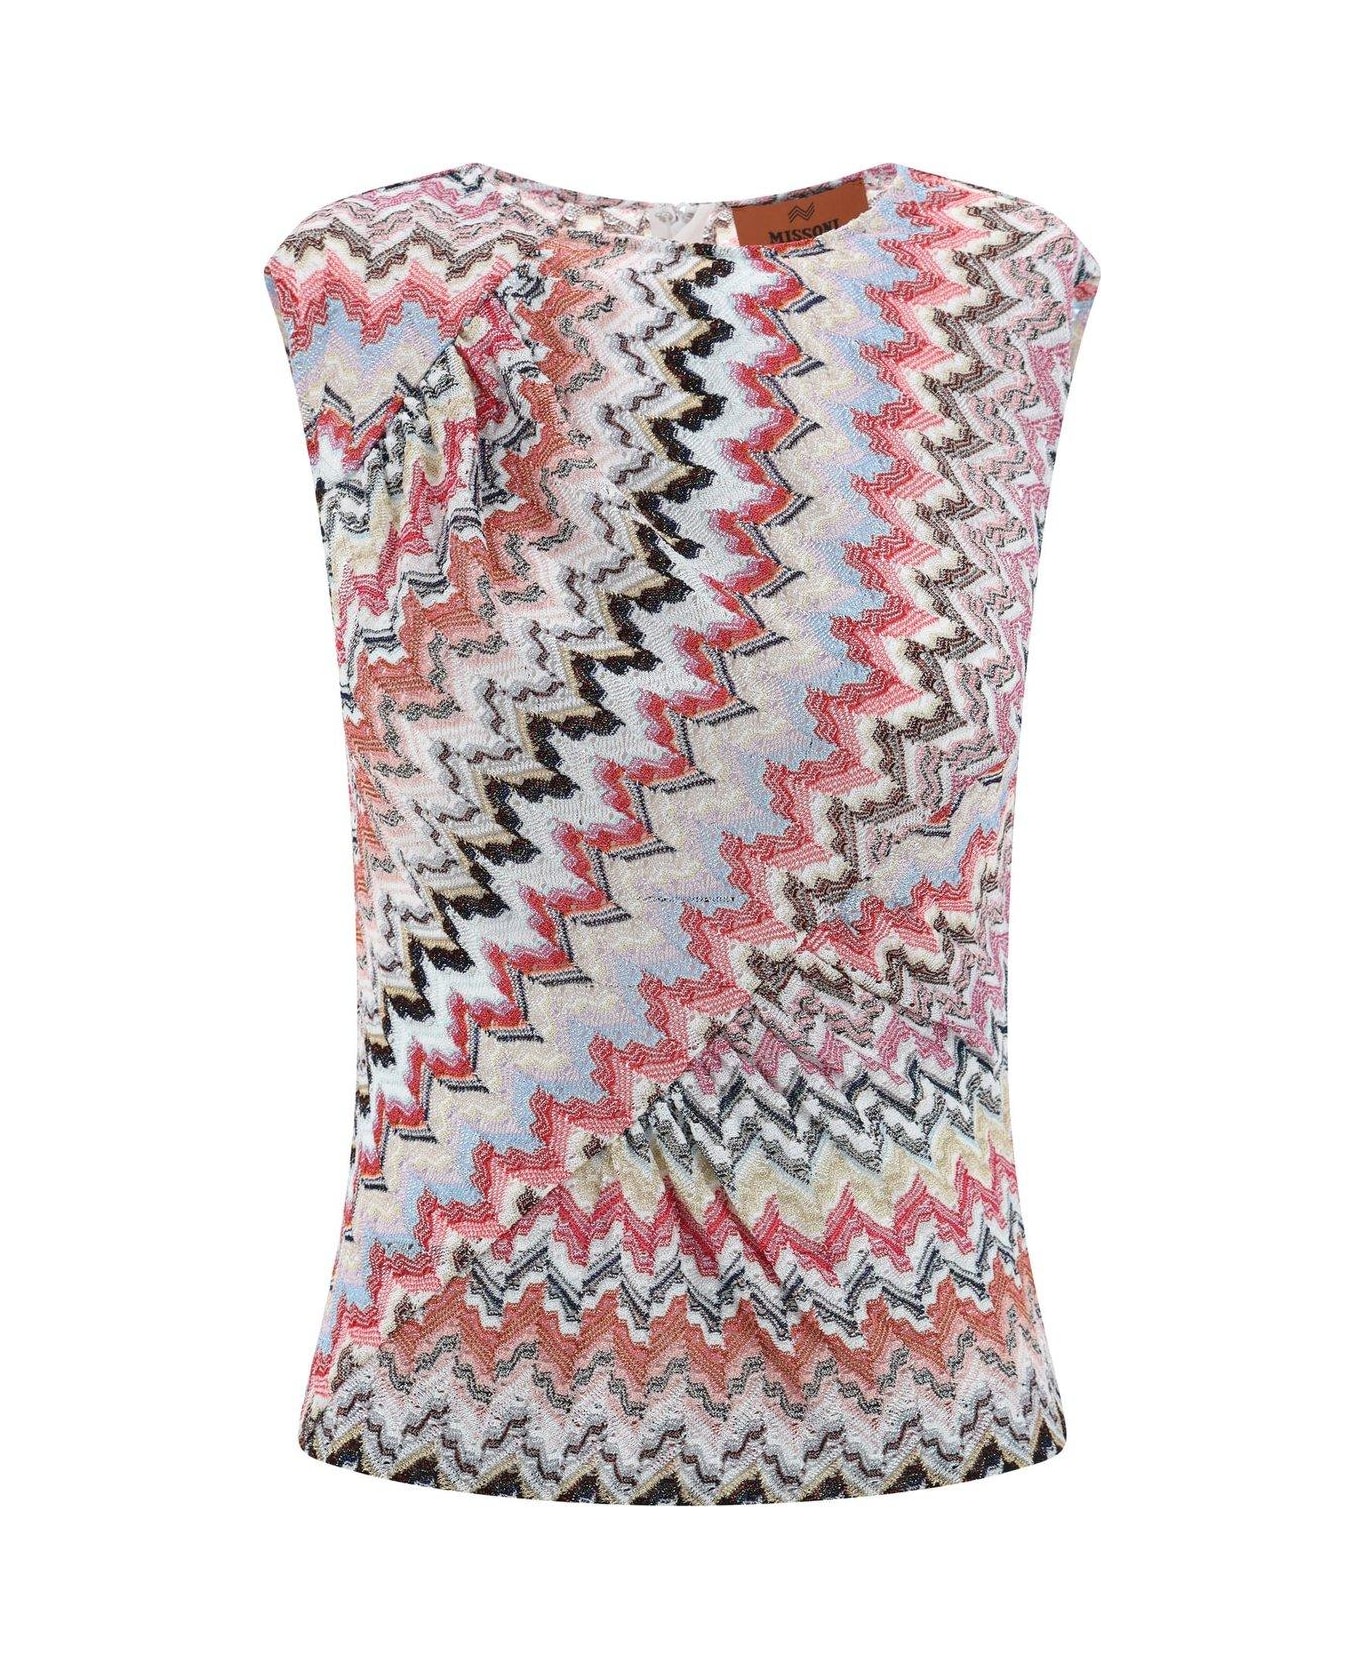 Missoni Zigzag Pattern Knitted Sleeveless Top - Multicolor